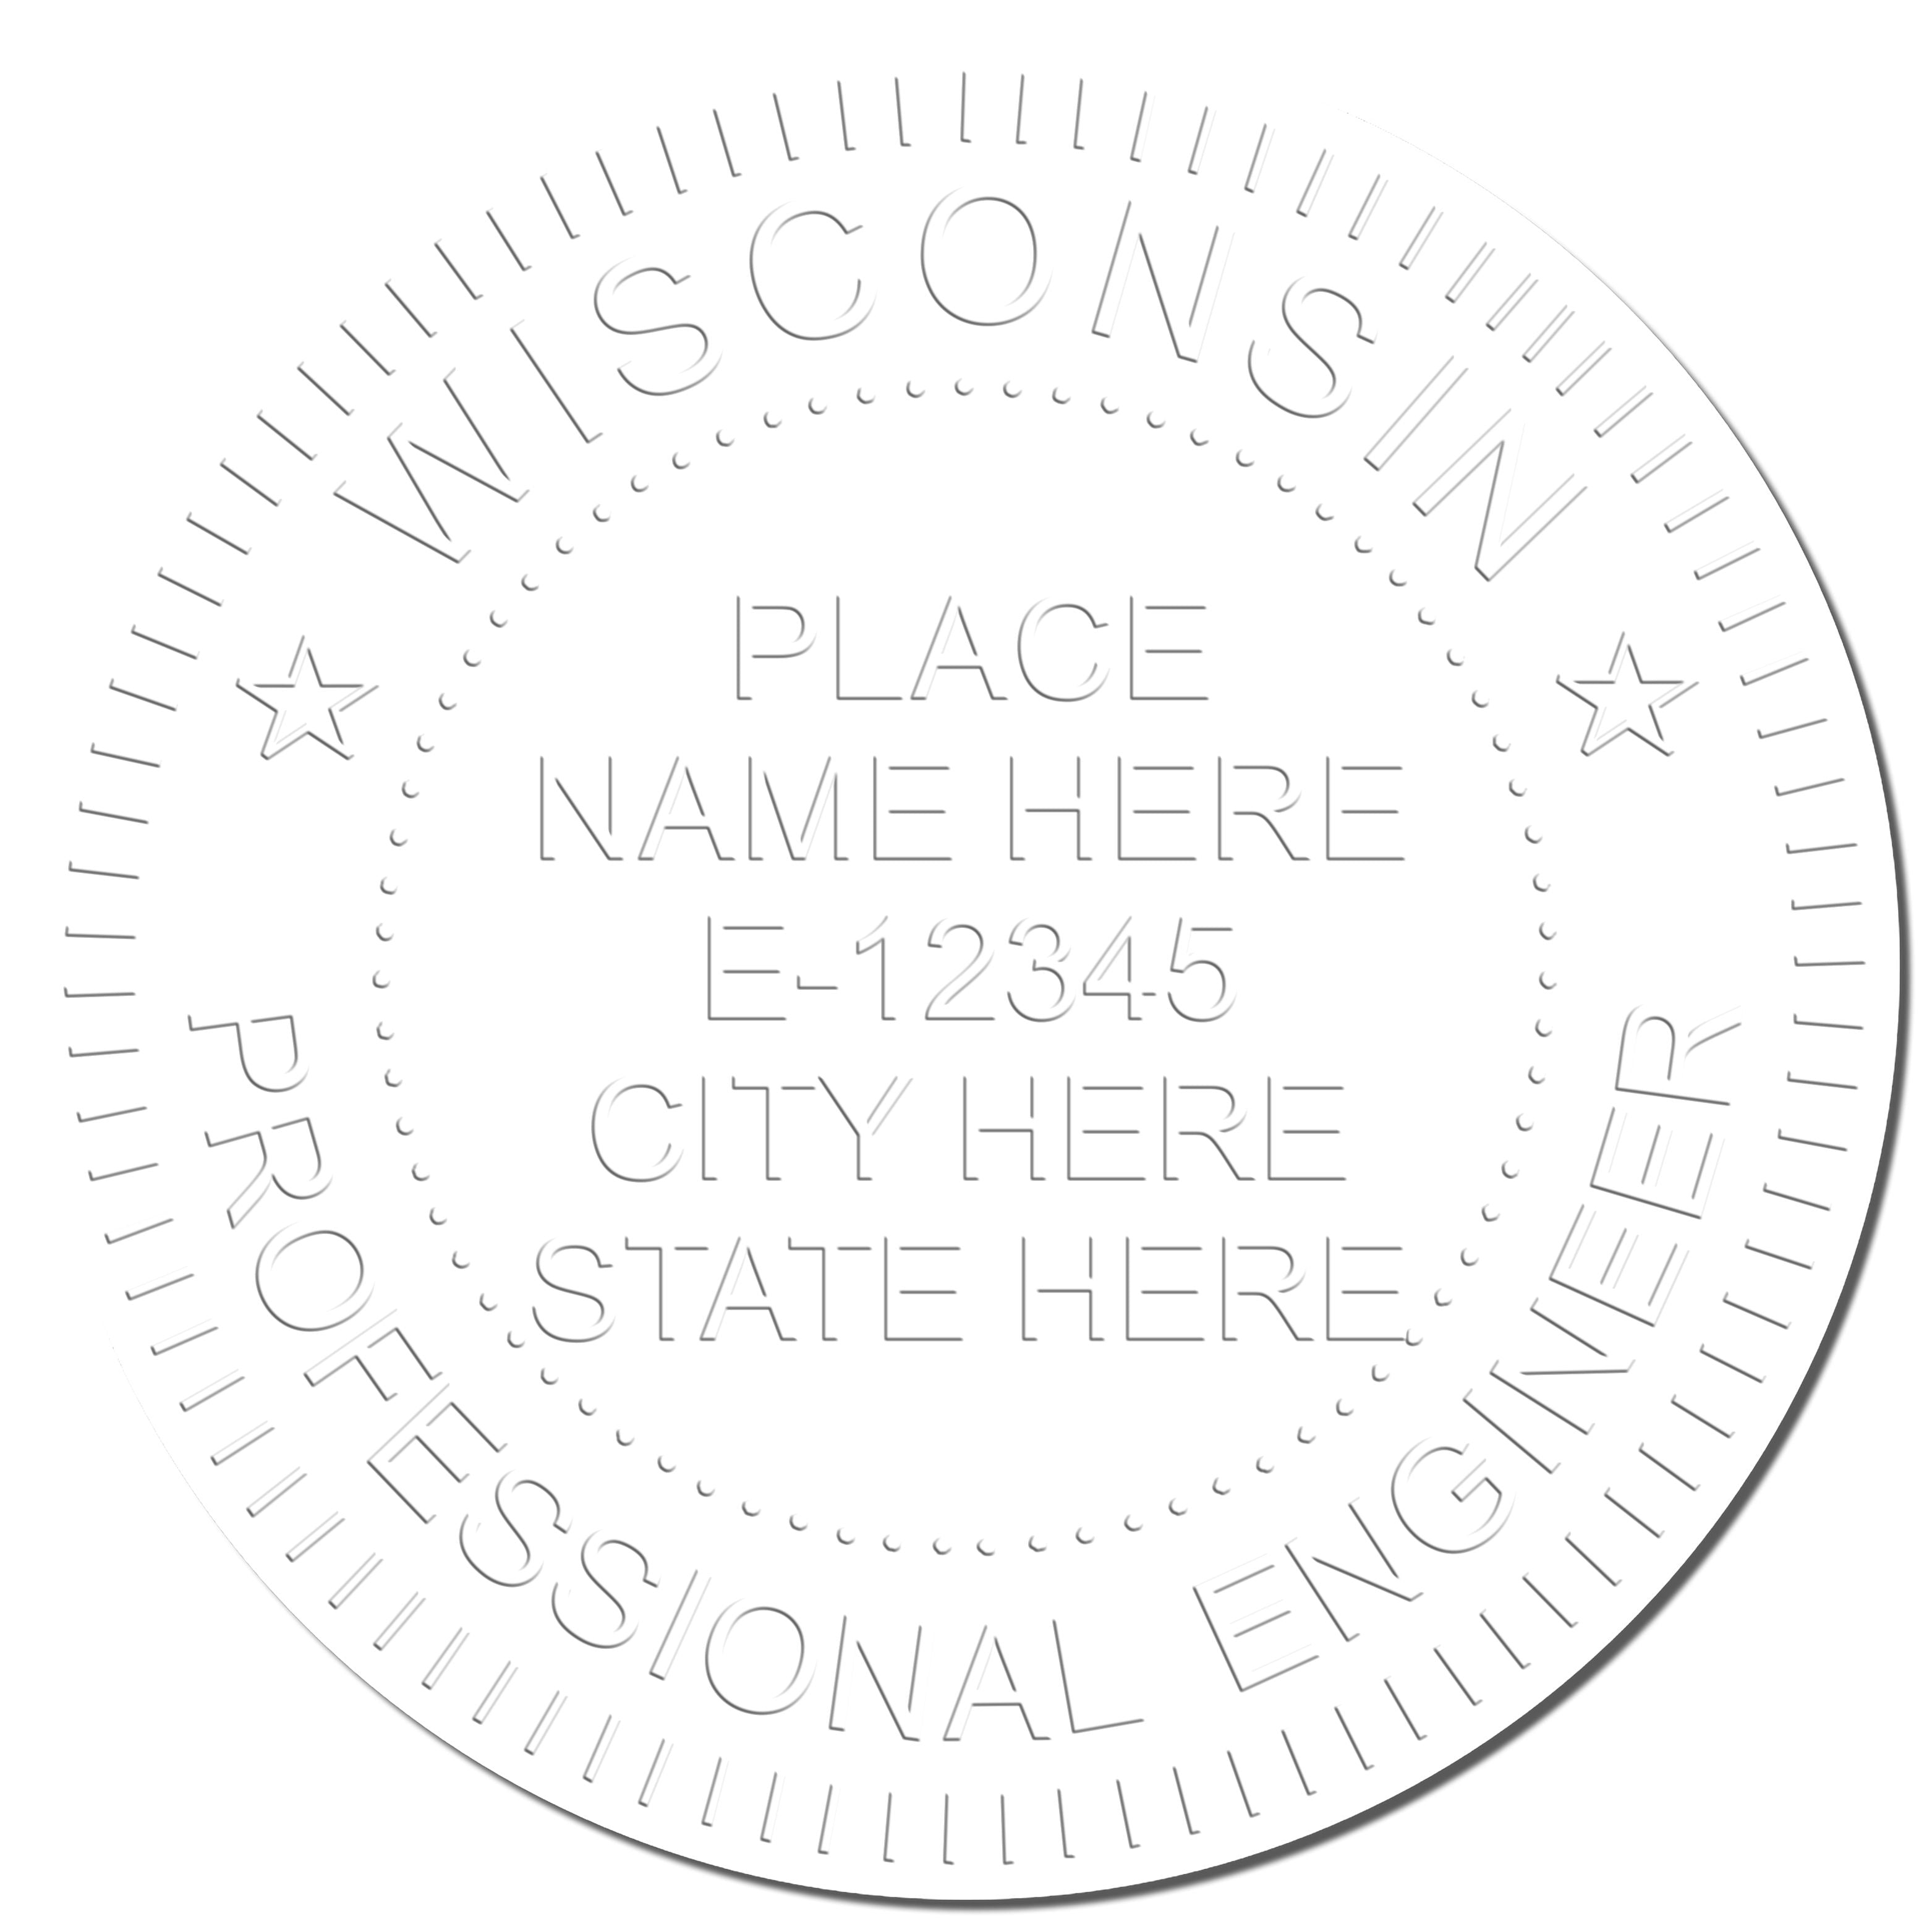 The Soft Wisconsin Professional Engineer Seal stamp impression comes to life with a crisp, detailed photo on paper - showcasing true professional quality.